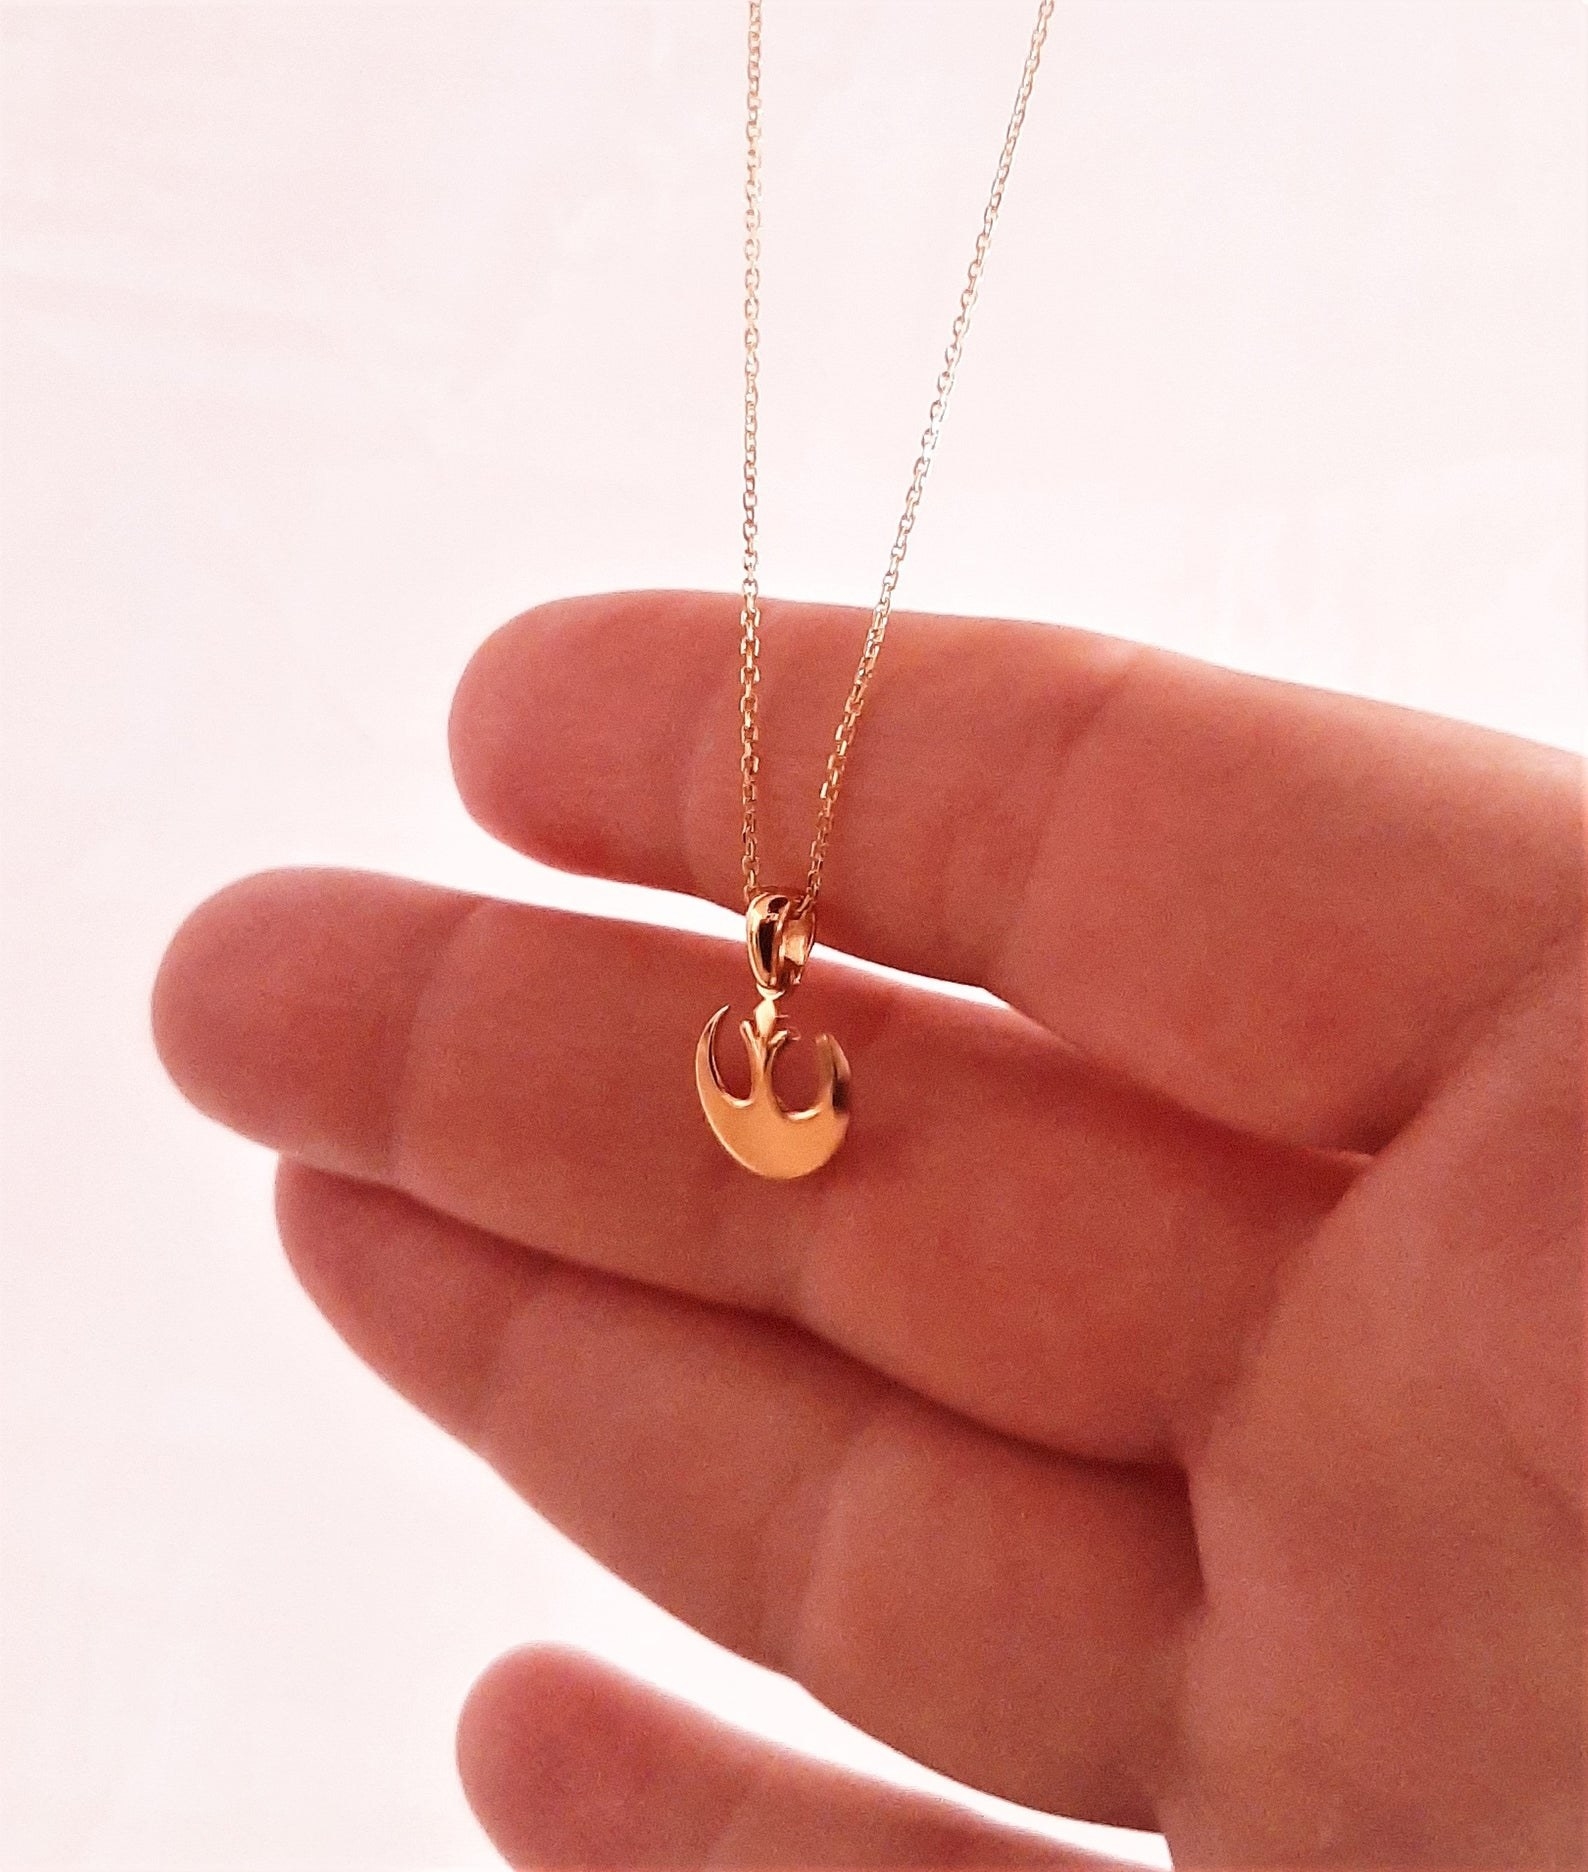 a gold necklace with a rebel alliance pendant hanging from it